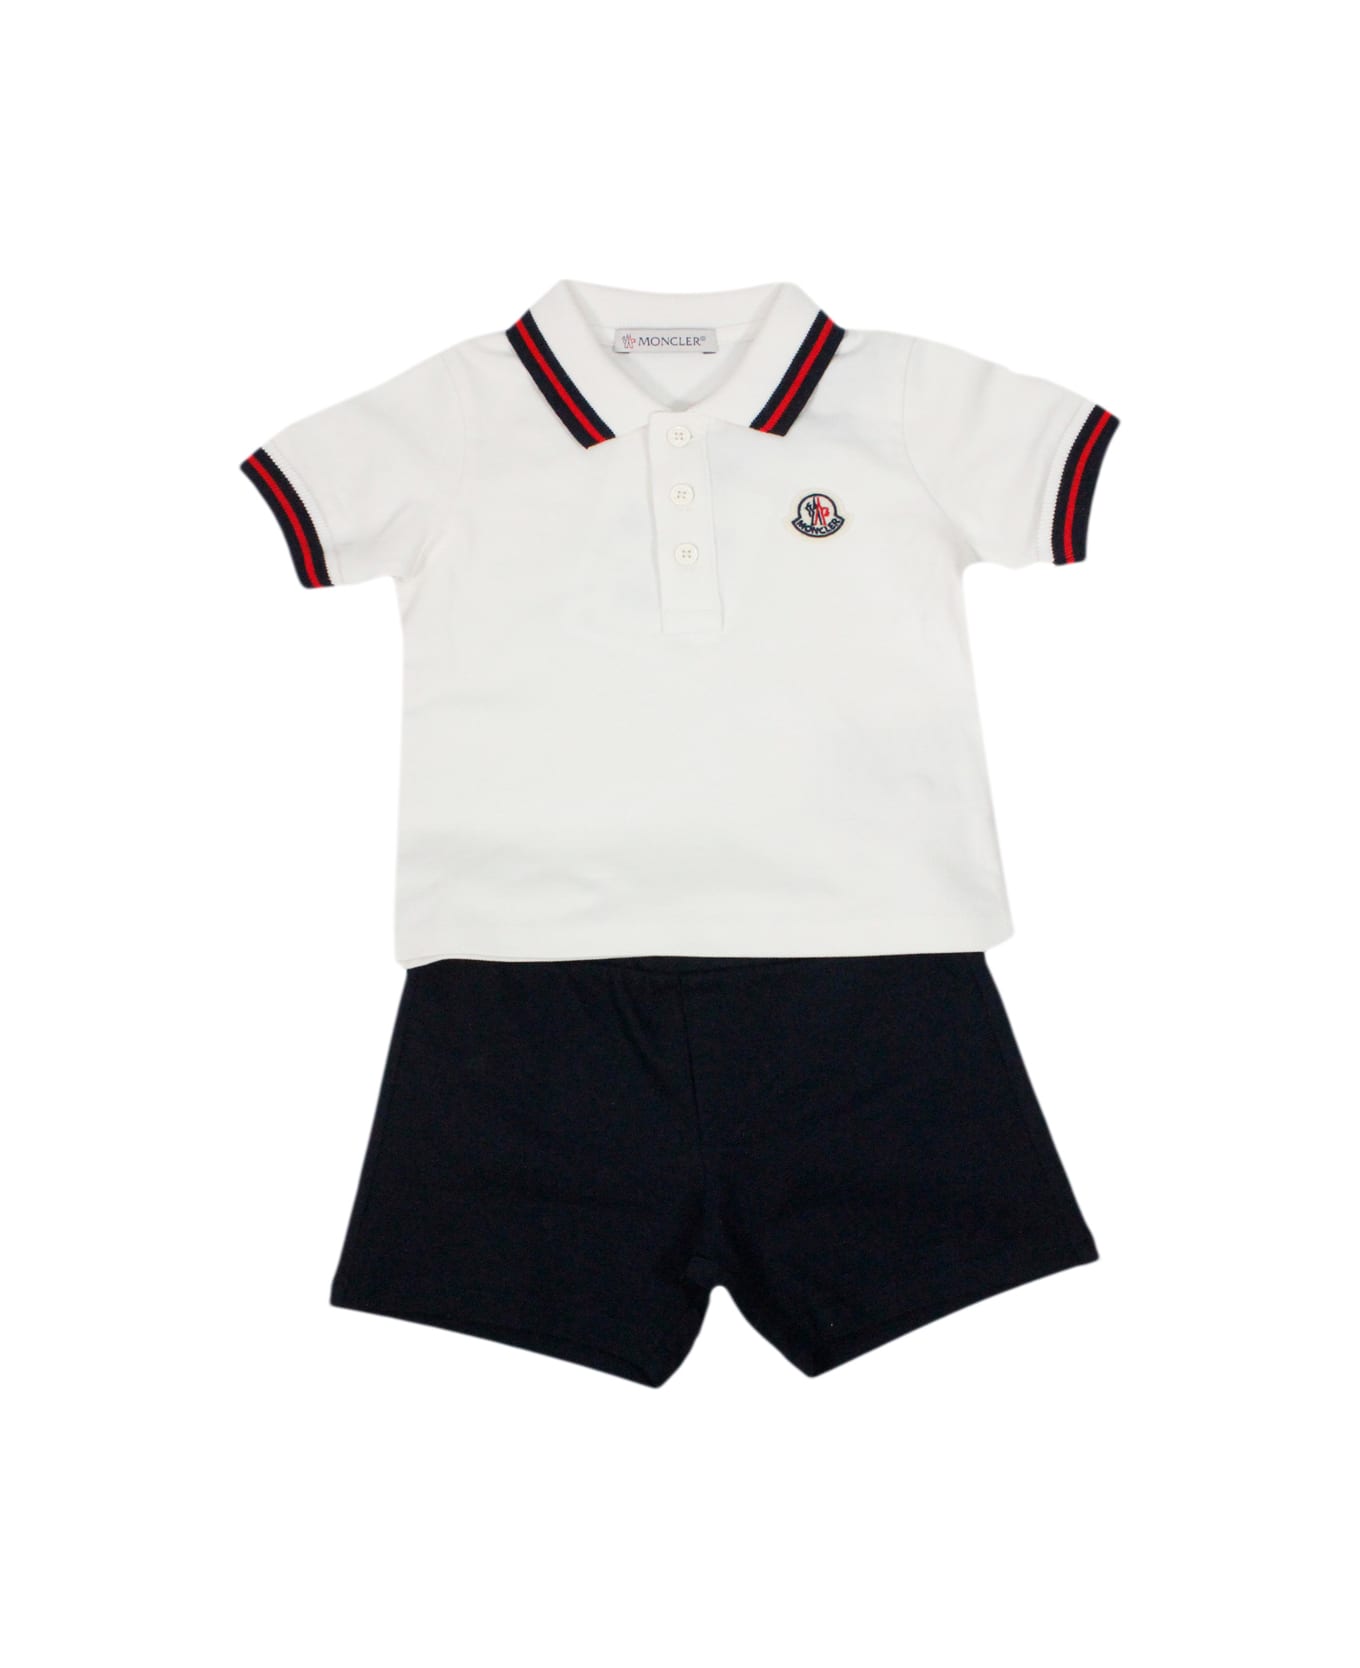 Moncler Complete With Short Sleeve Polo Shirt And Shorts With Elastic Waist - White